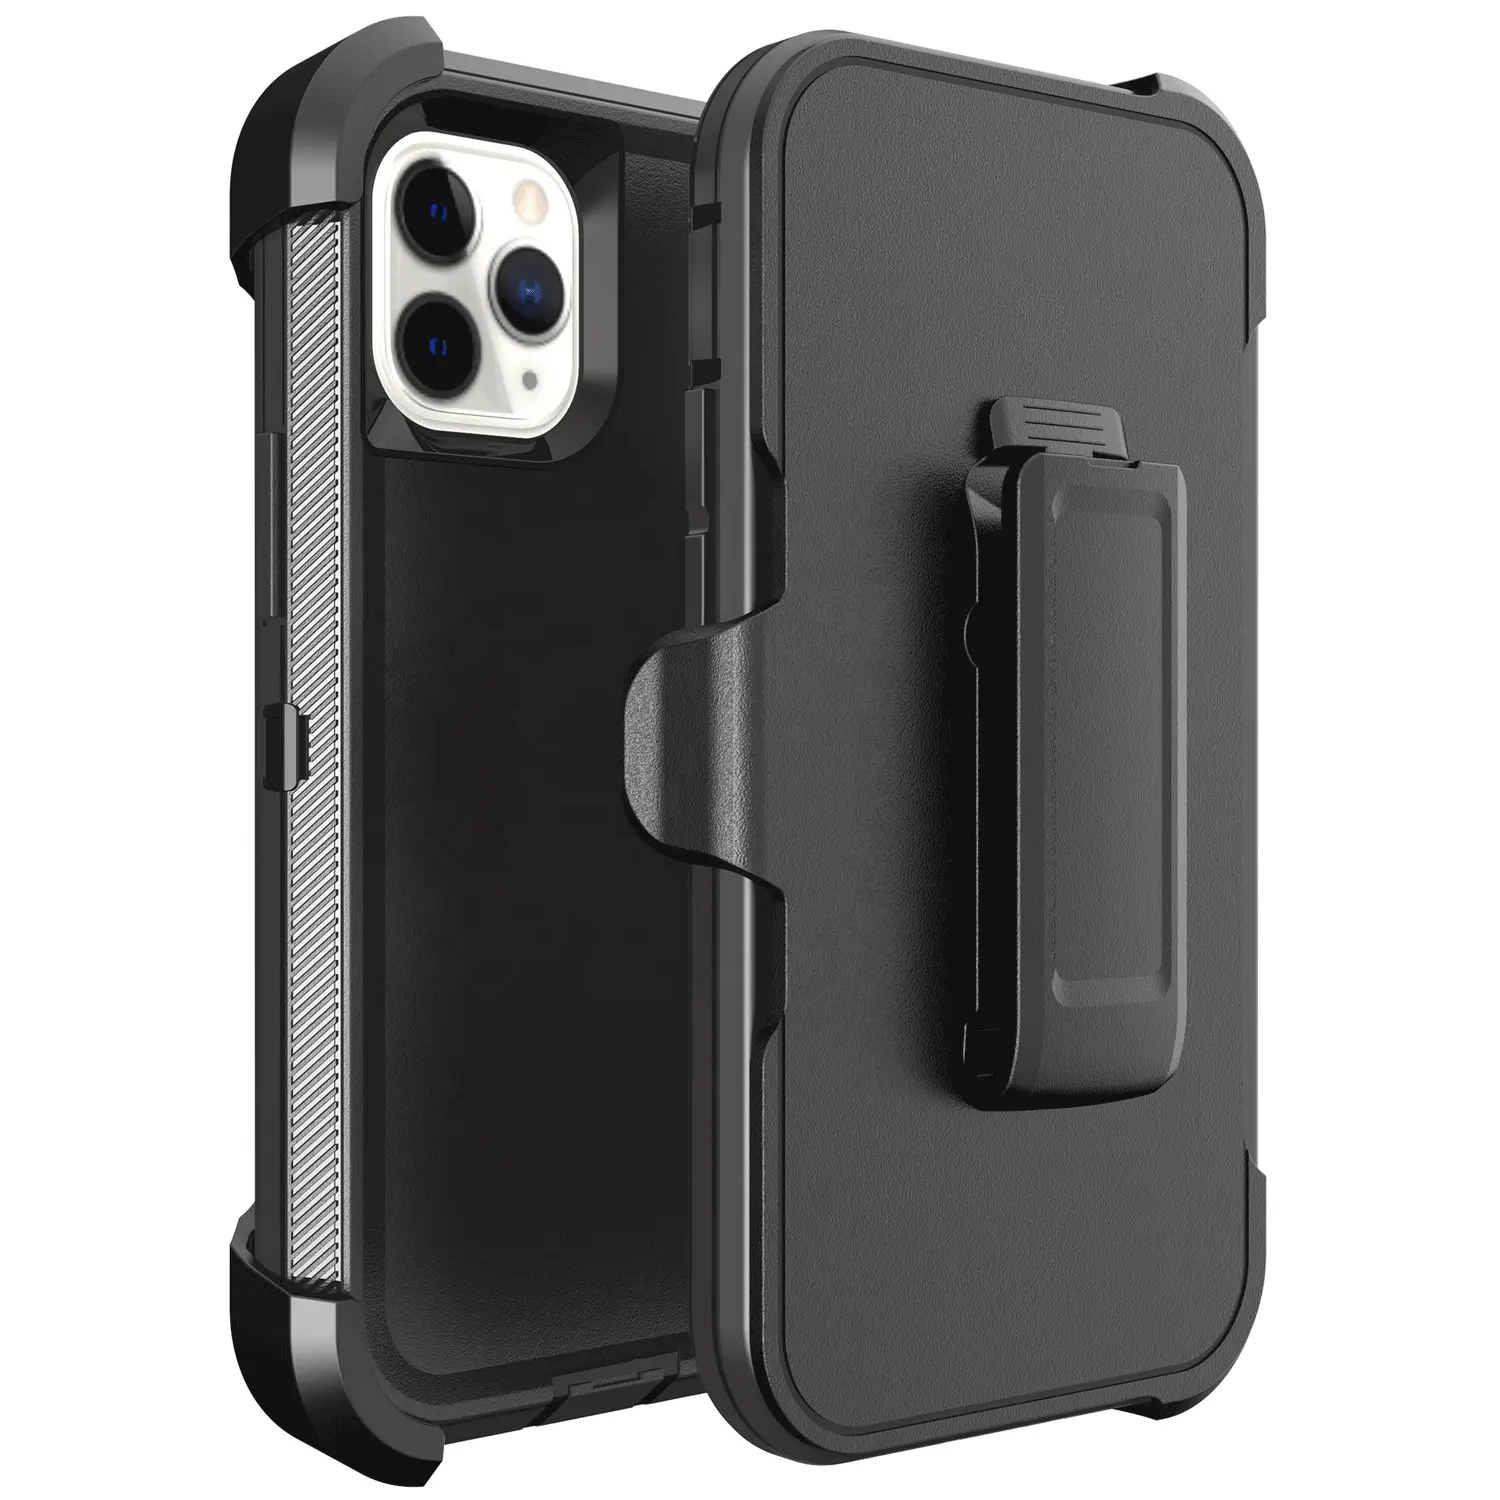 2022 new shockproof armor heavy duty phone case for iphone 14 pro max 3 in 1 holster belt clip case for iphone 14